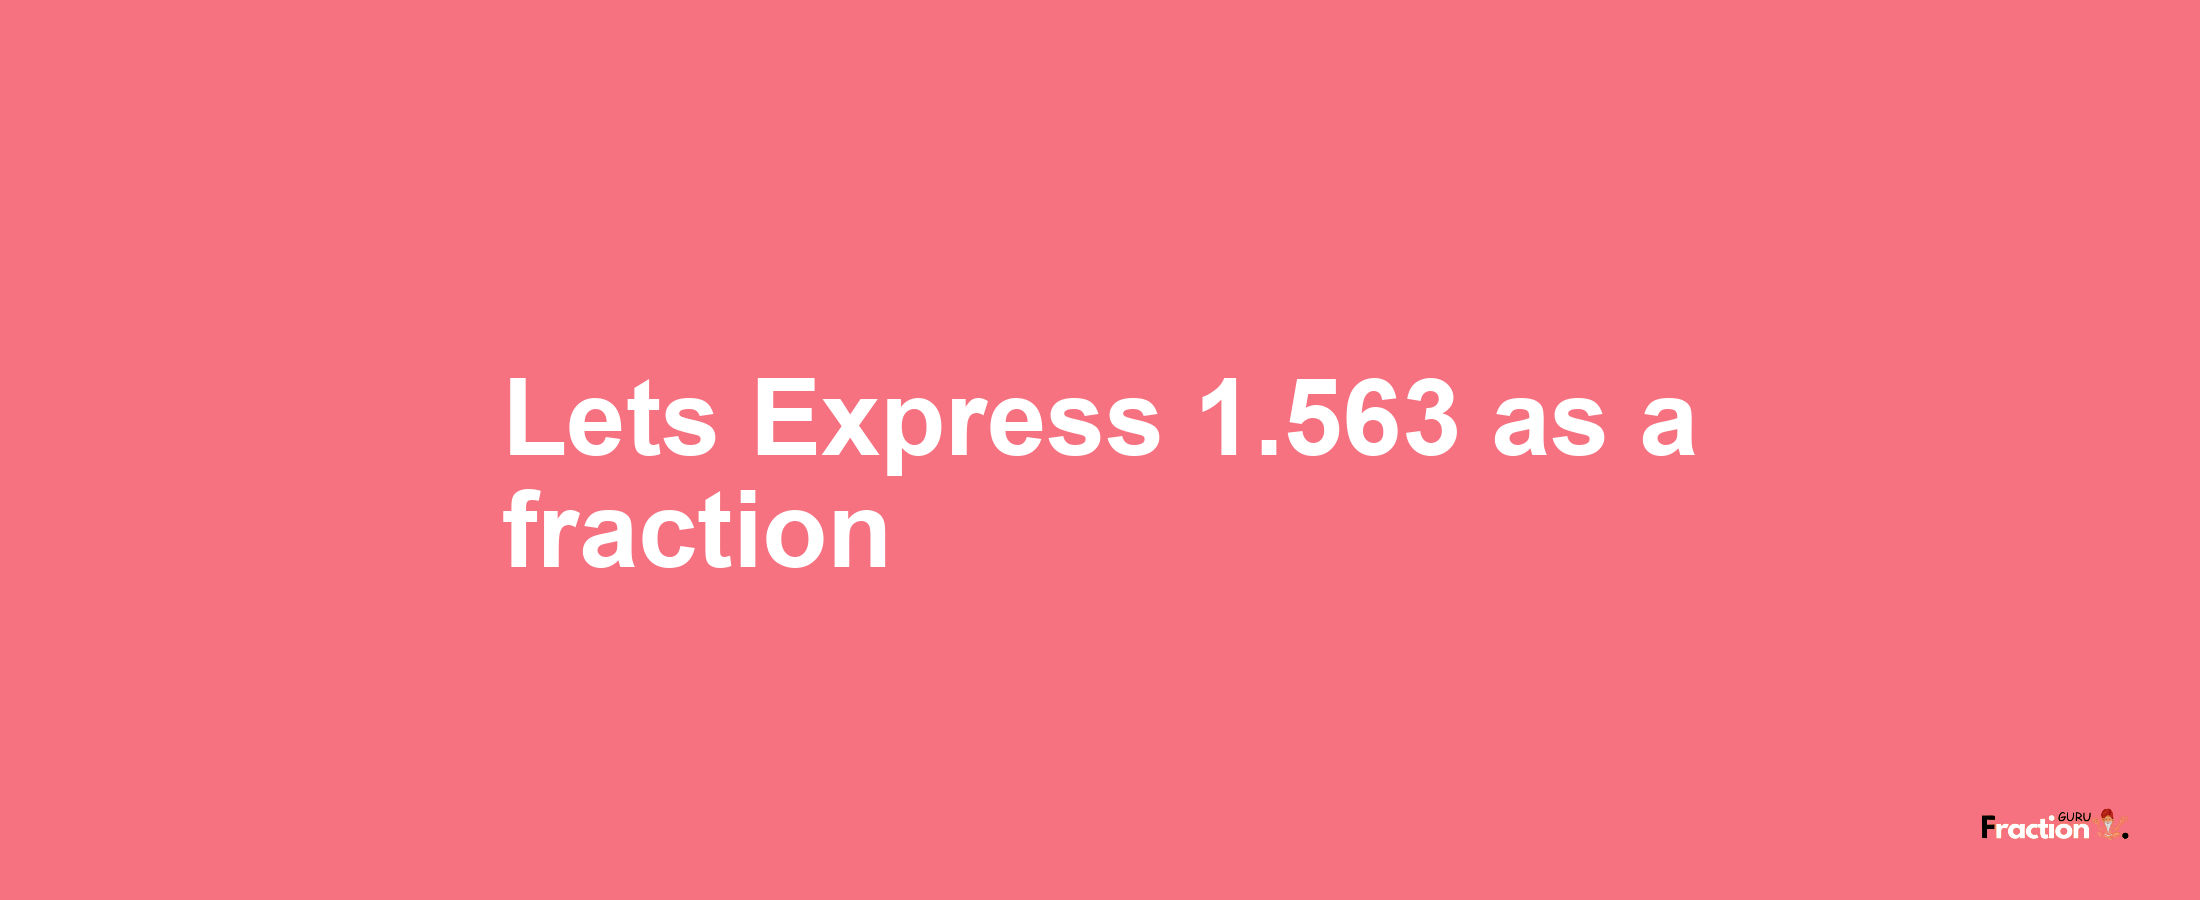 Lets Express 1.563 as afraction